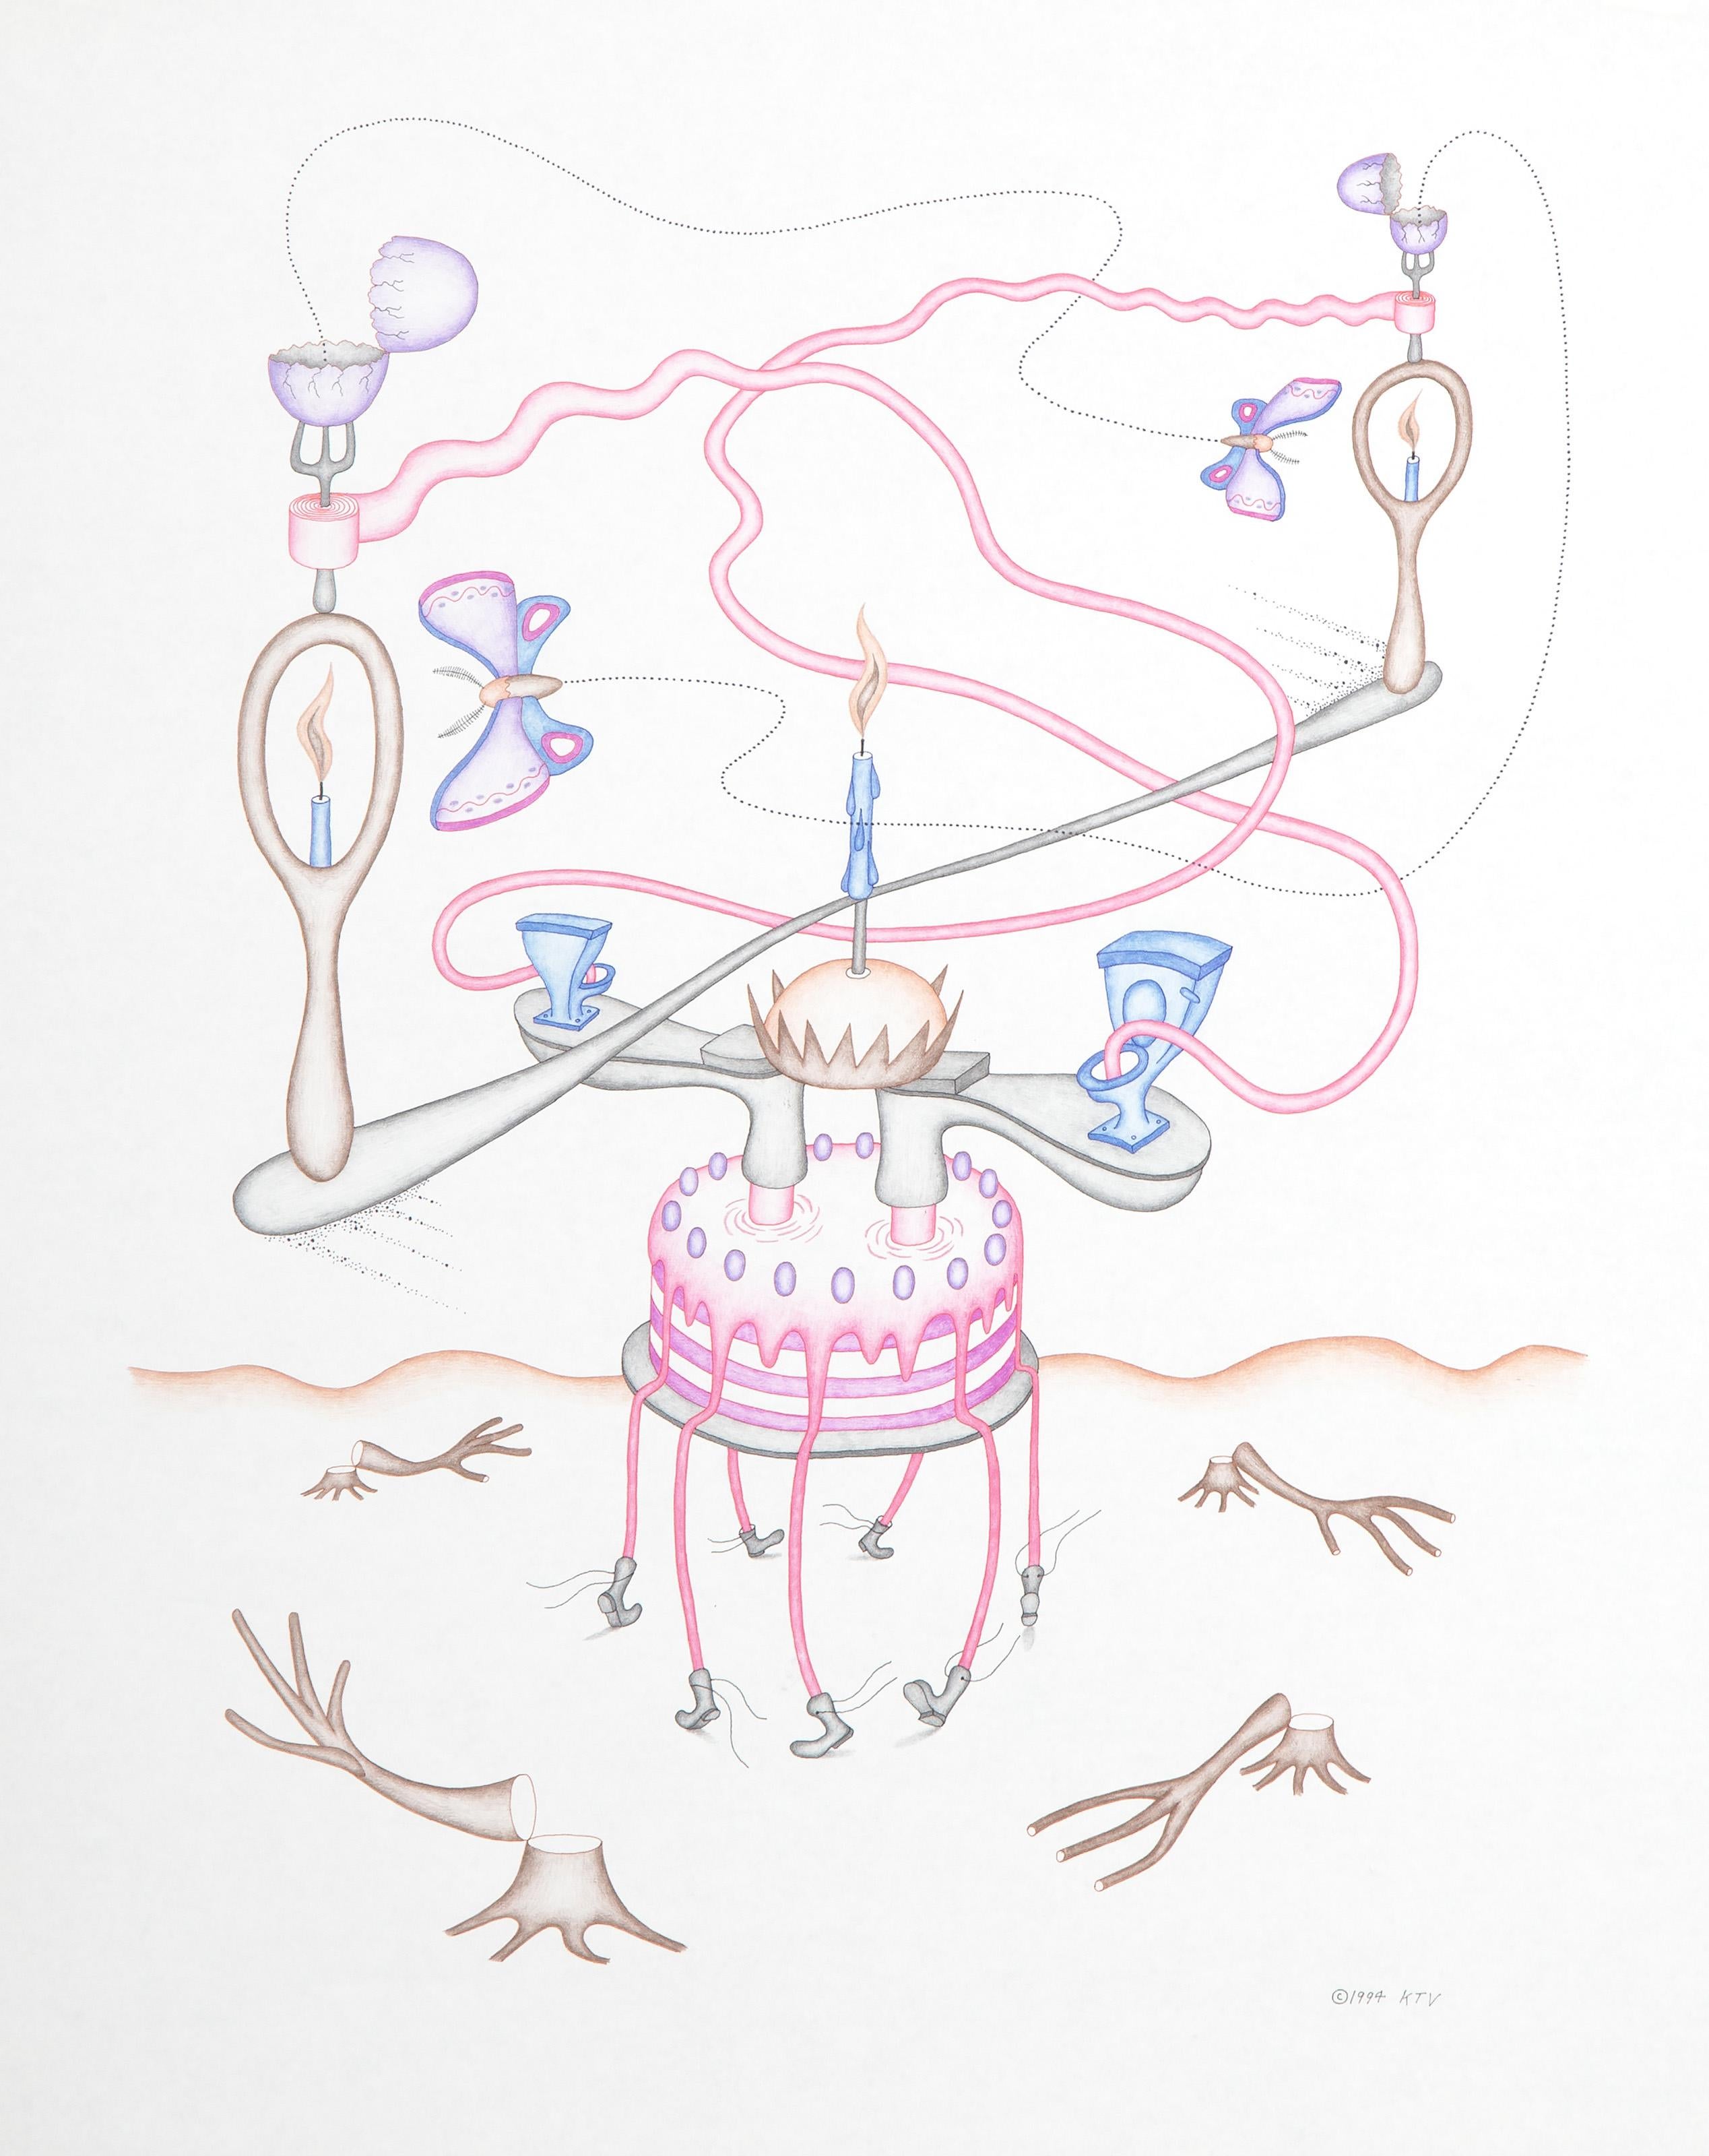 Kevin Varner, American (1954 - 2019) -  The Royo-Rooter Cake. Year: 1994, Medium: Color Pencil and Ink on Paper, signed and dated lower left, Size: 28.5 x 21.75 in. (72.39 x 55.25 cm) 